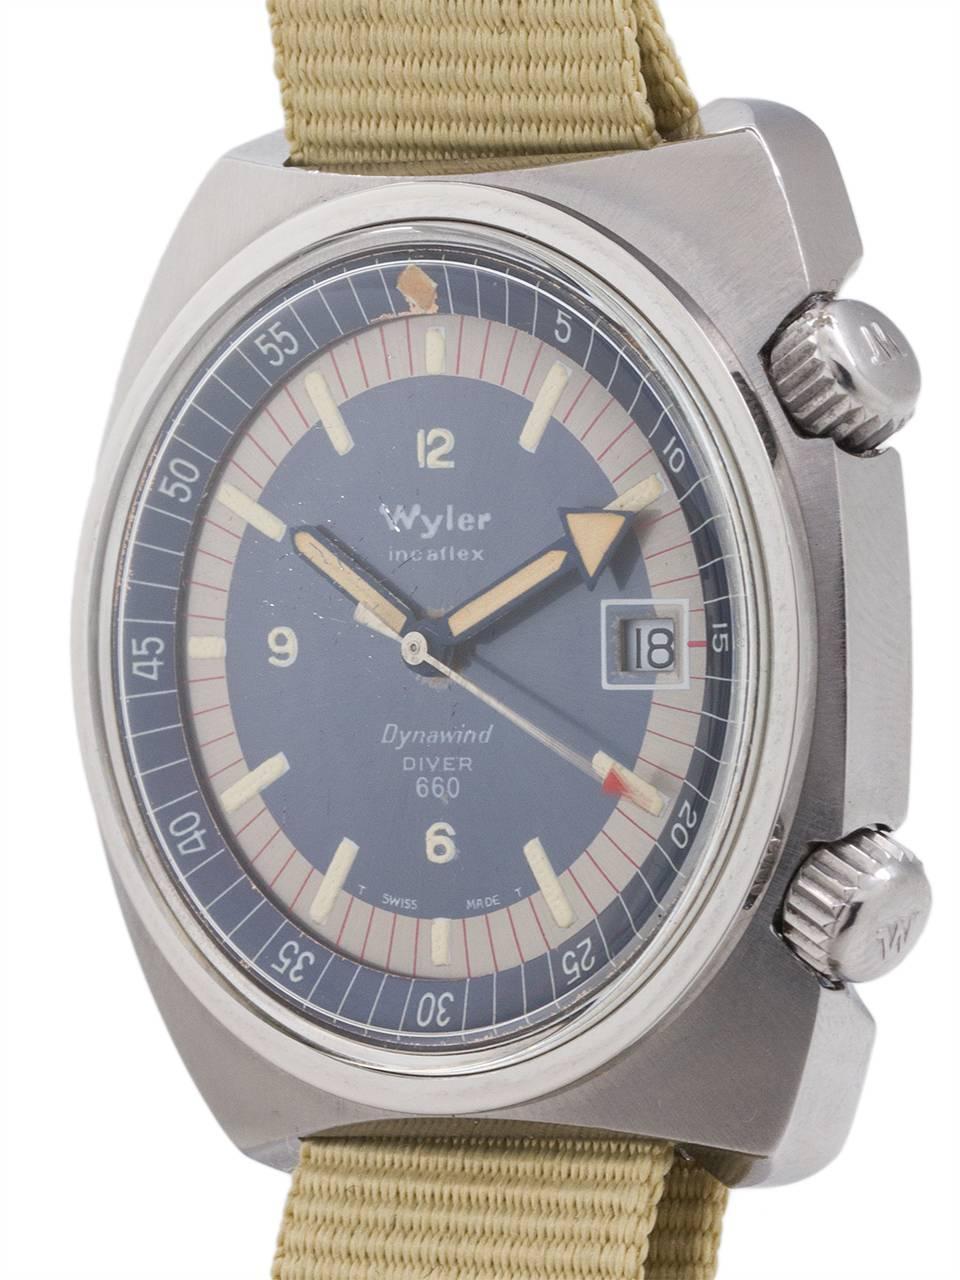 
Wyler stainless steel diver’s 660 “Dynawind” super compressor circa 1960’s, great condition bowed tonneau shaped case with screwed back, dual crowns, top crown to advance inner rotating bezel. Beautiful condition original “target” pattern dial with